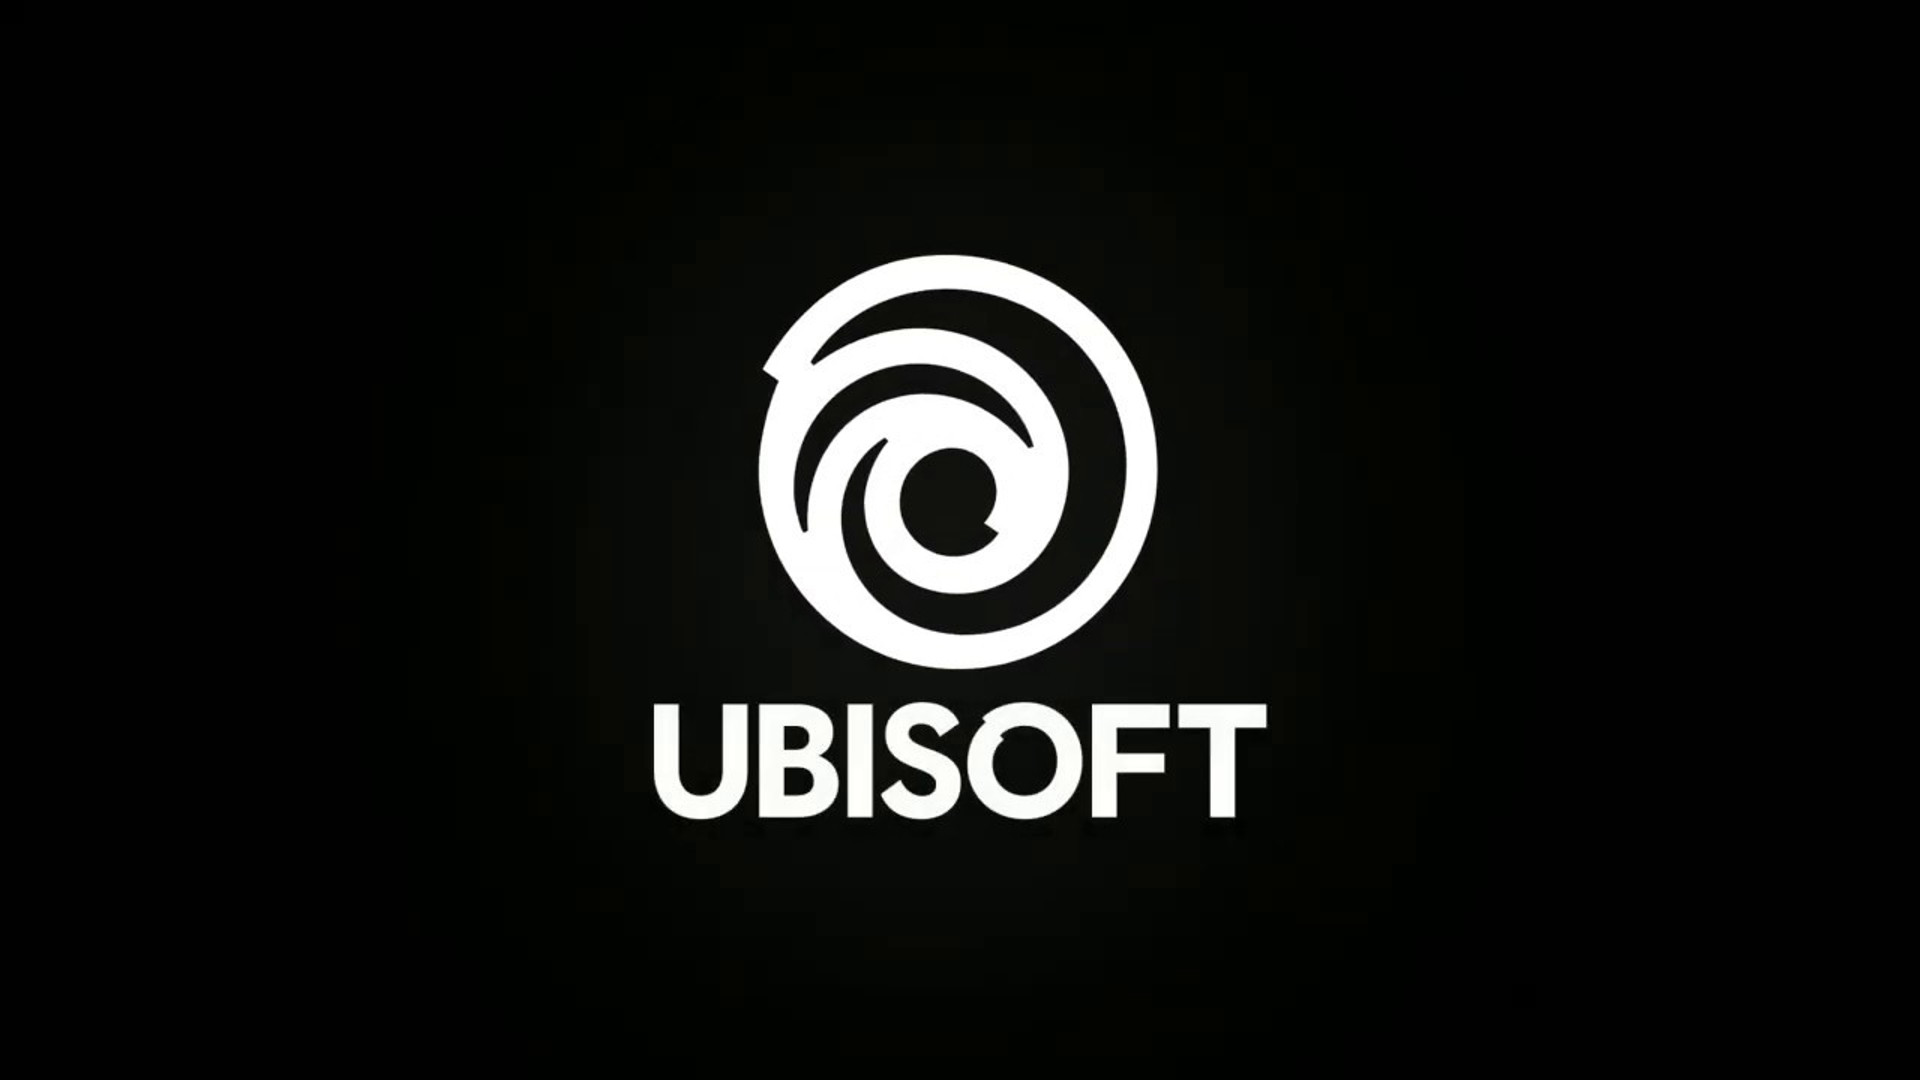 Ubisoft employees call on management to “properly acknowledge our demands”